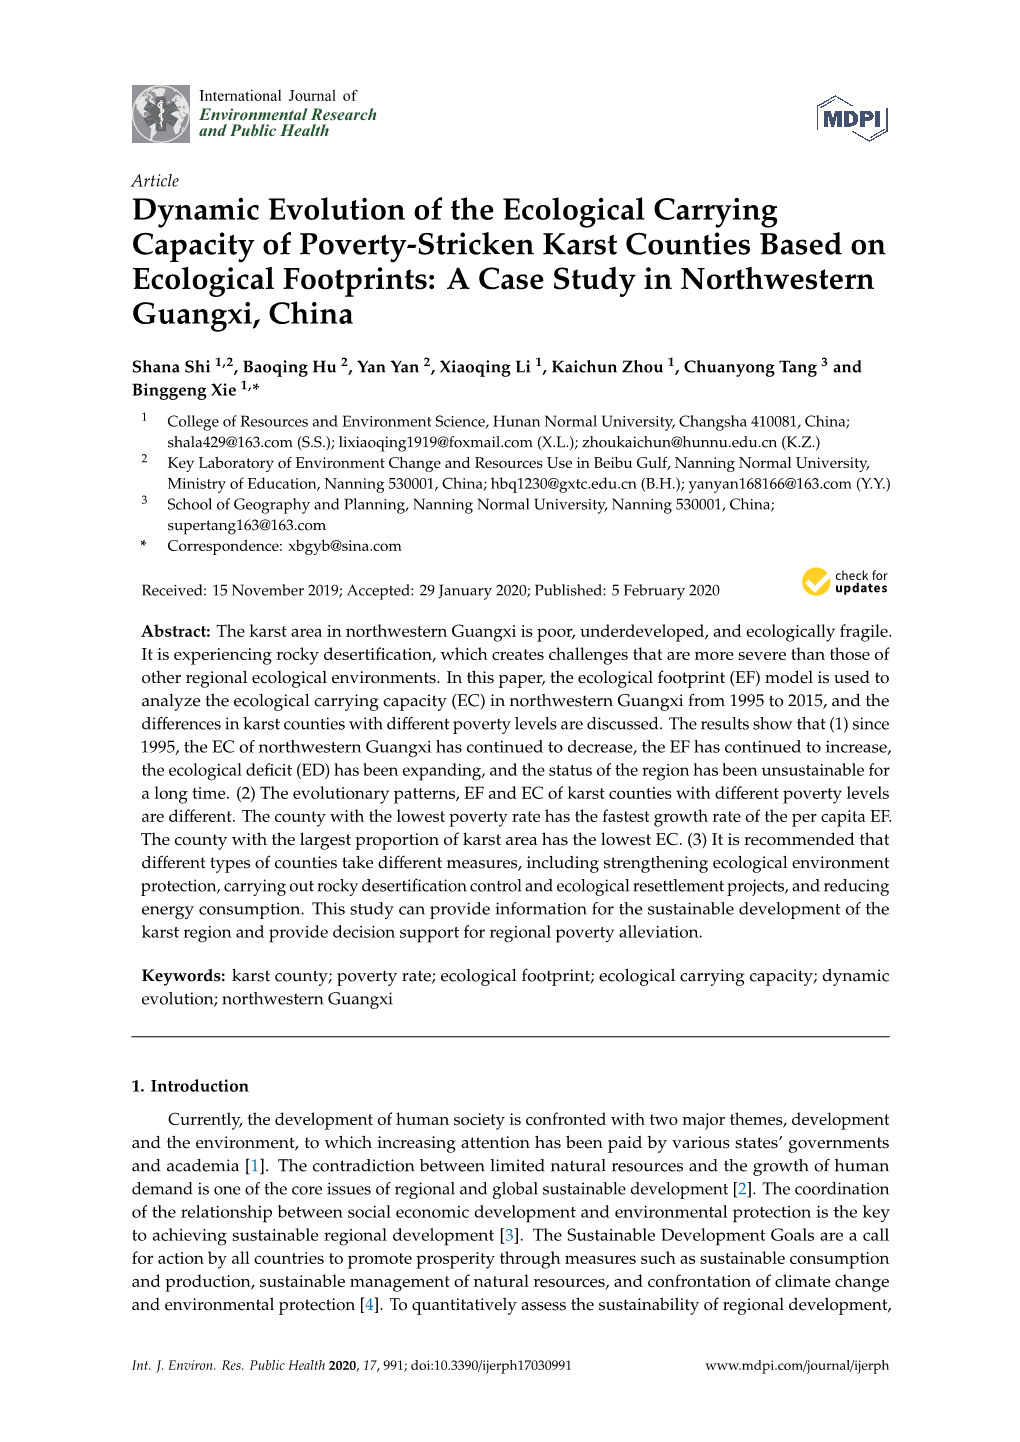 Dynamic Evolution of the Ecological Carrying Capacity of Poverty-Stricken Karst Counties Based on Ecological Footprints: a Case Study in Northwestern Guangxi, China